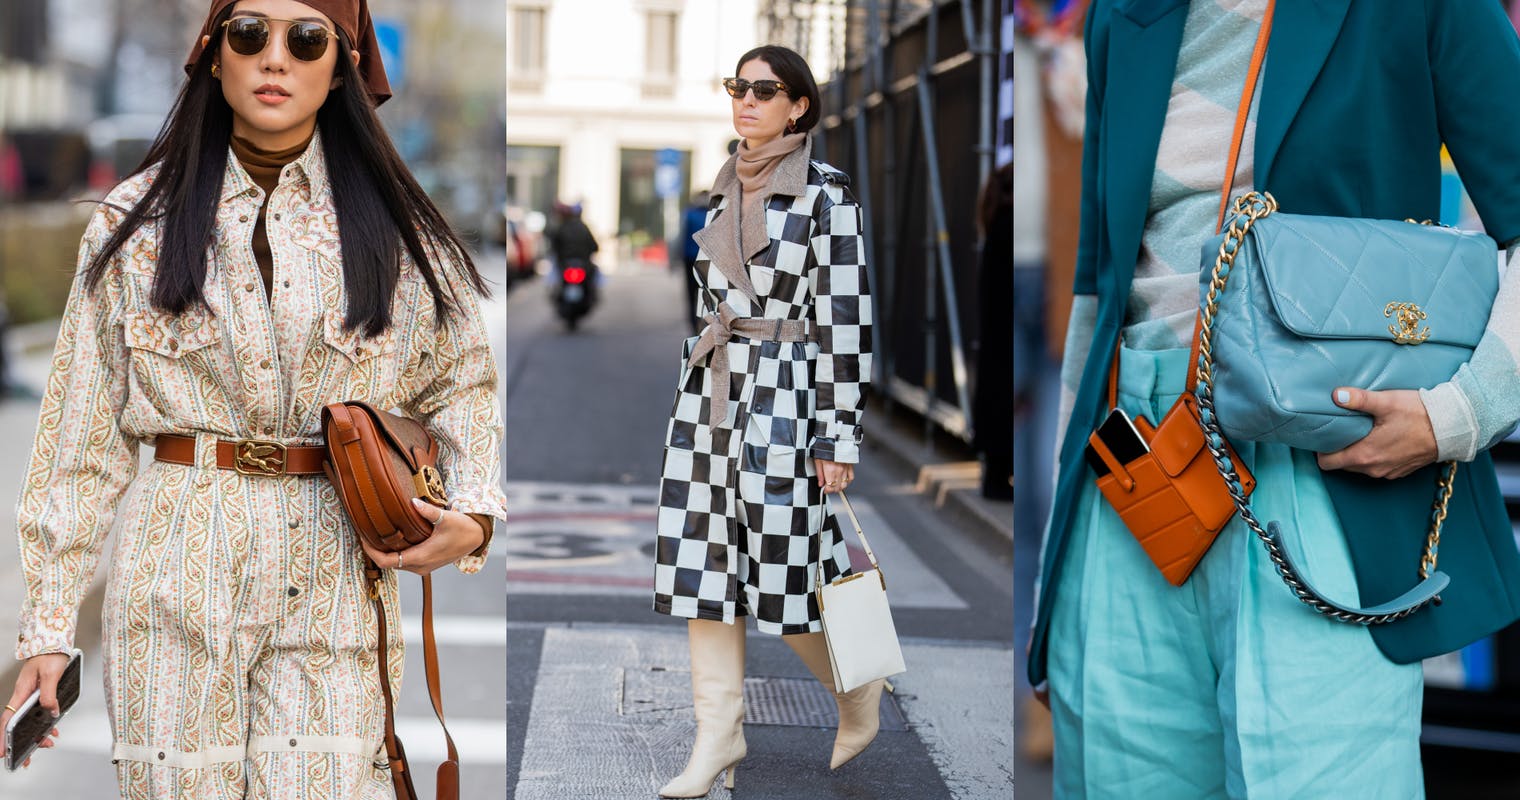 How Fashion Styles Relates to Your Personality